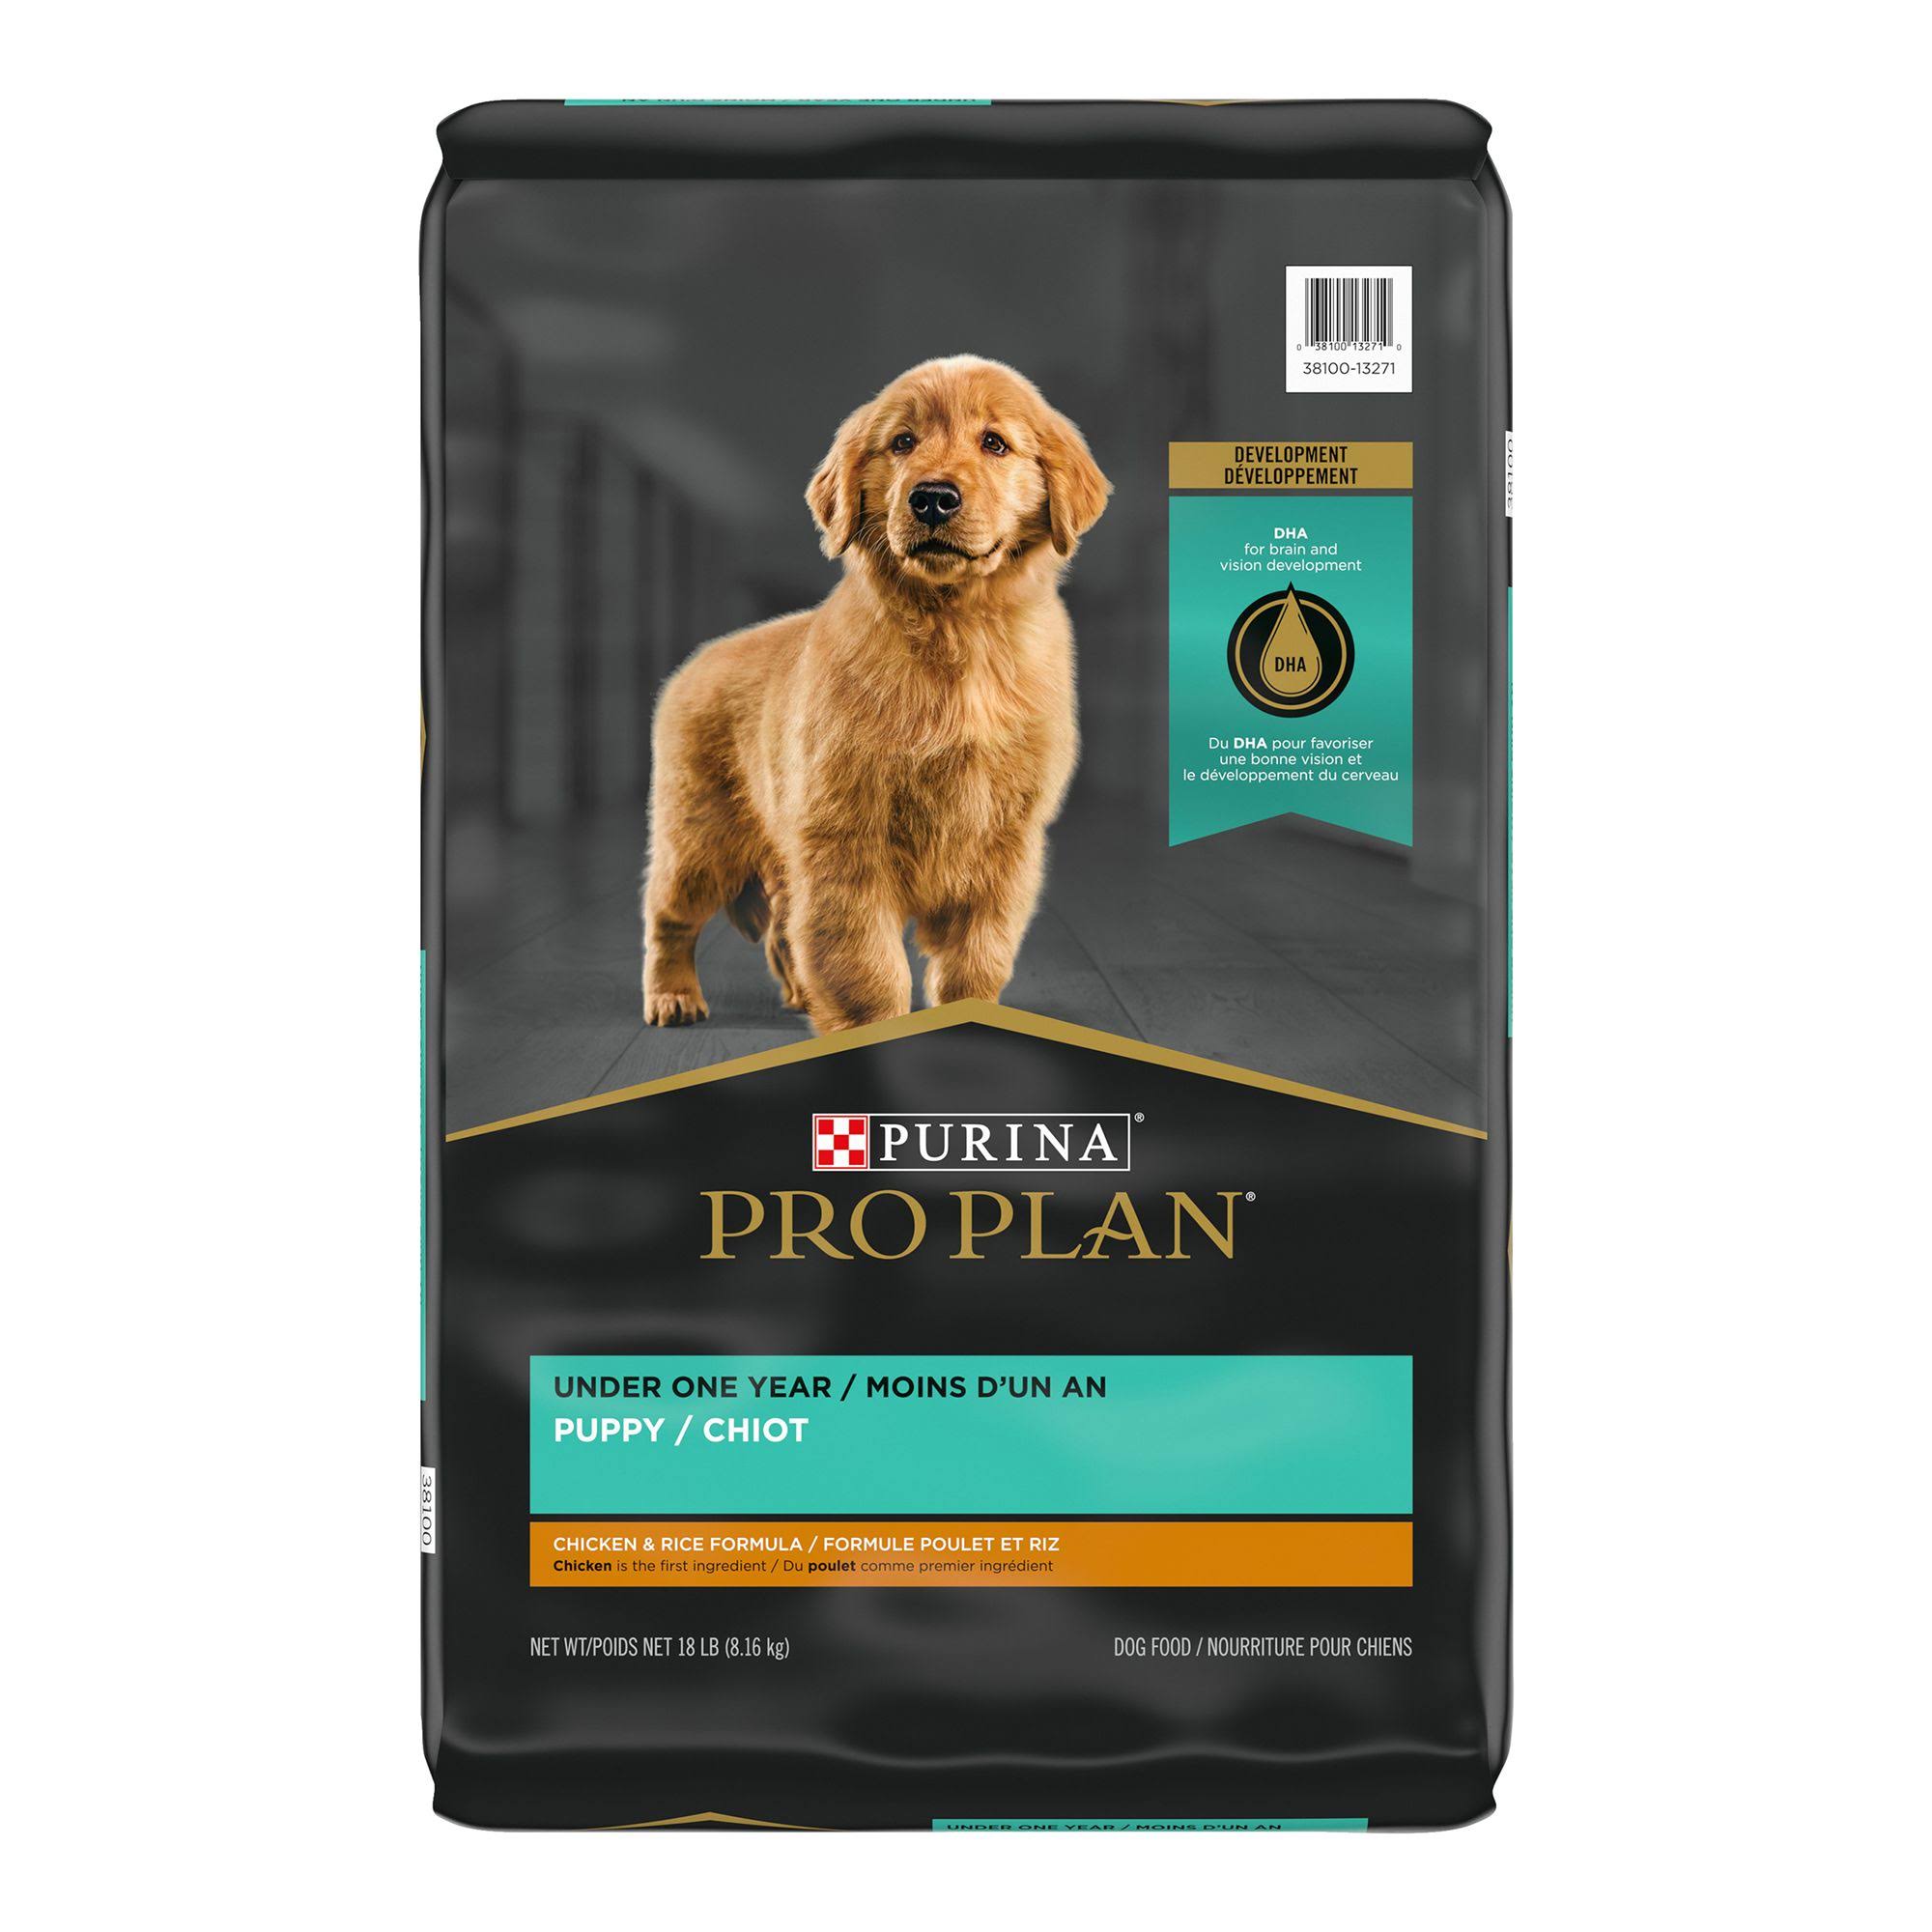 Purina Pro Plan Focus Puppy Dry Dog Food - Chicken and Rice Formula, 18lbs